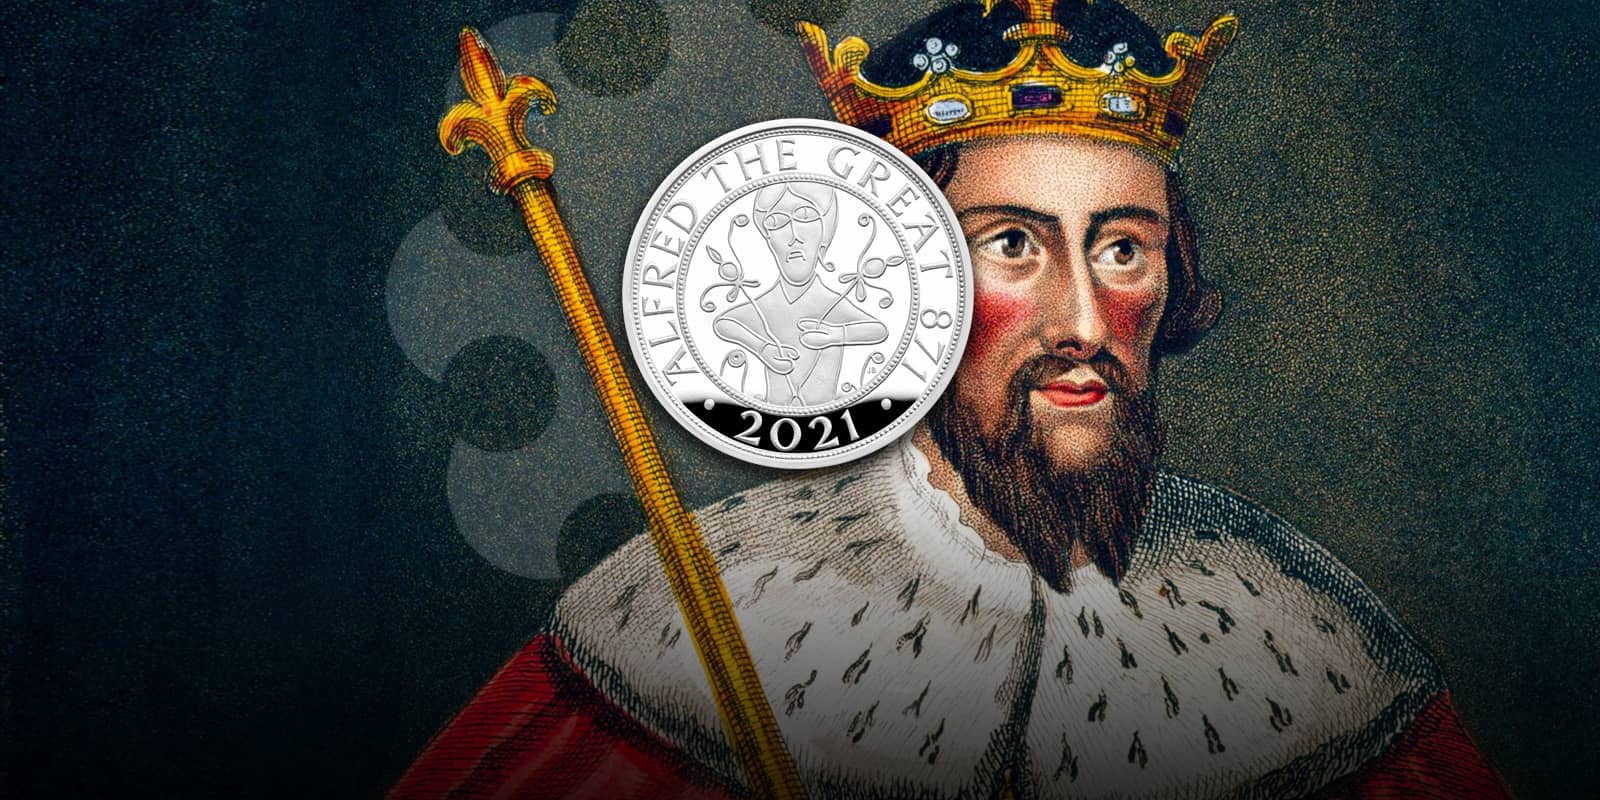 Alfred the great